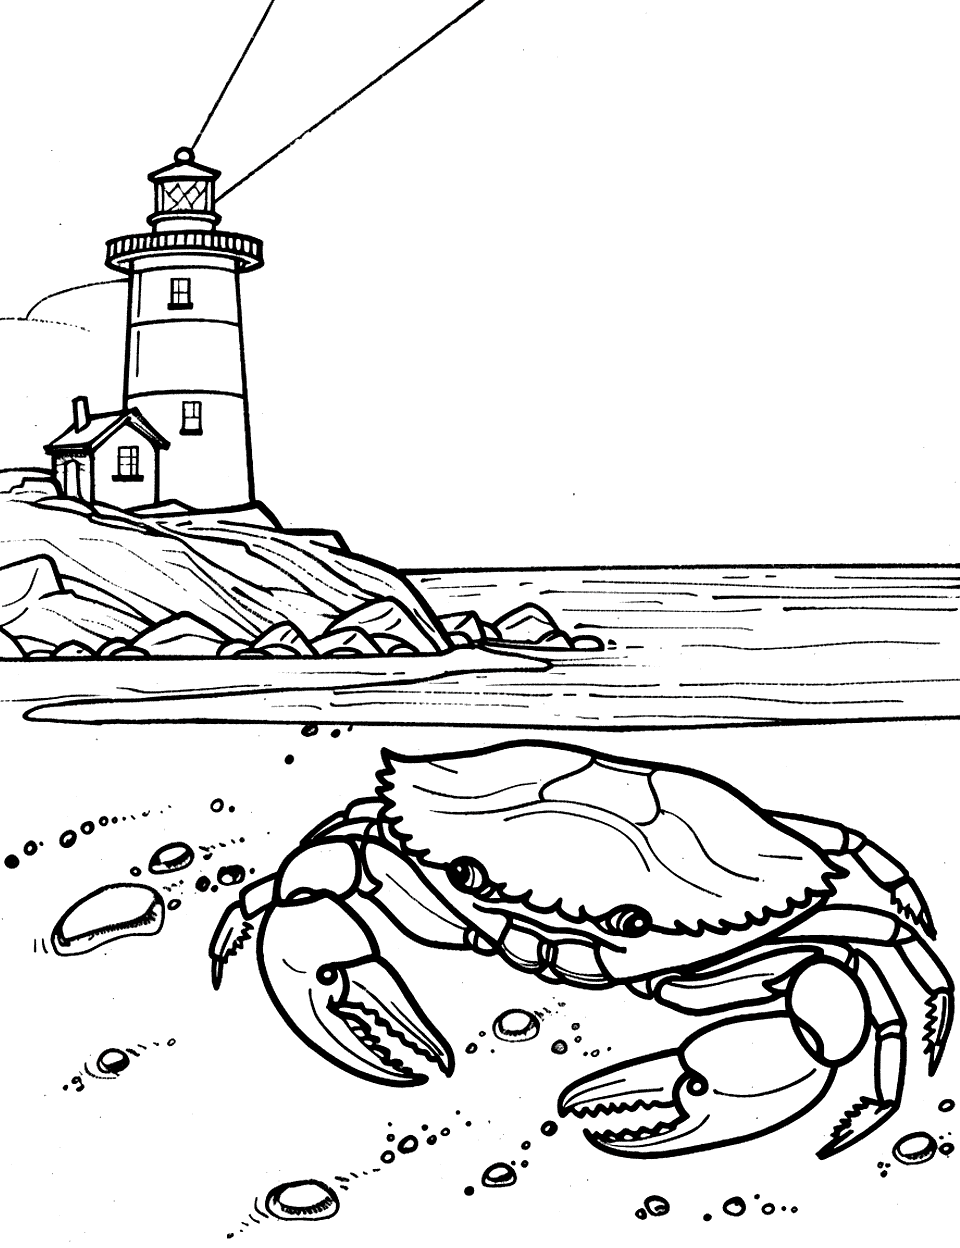 Crab and the Lighthouse Coloring Page - A distant lighthouse and a crab that is scuttling across the beach foreground.